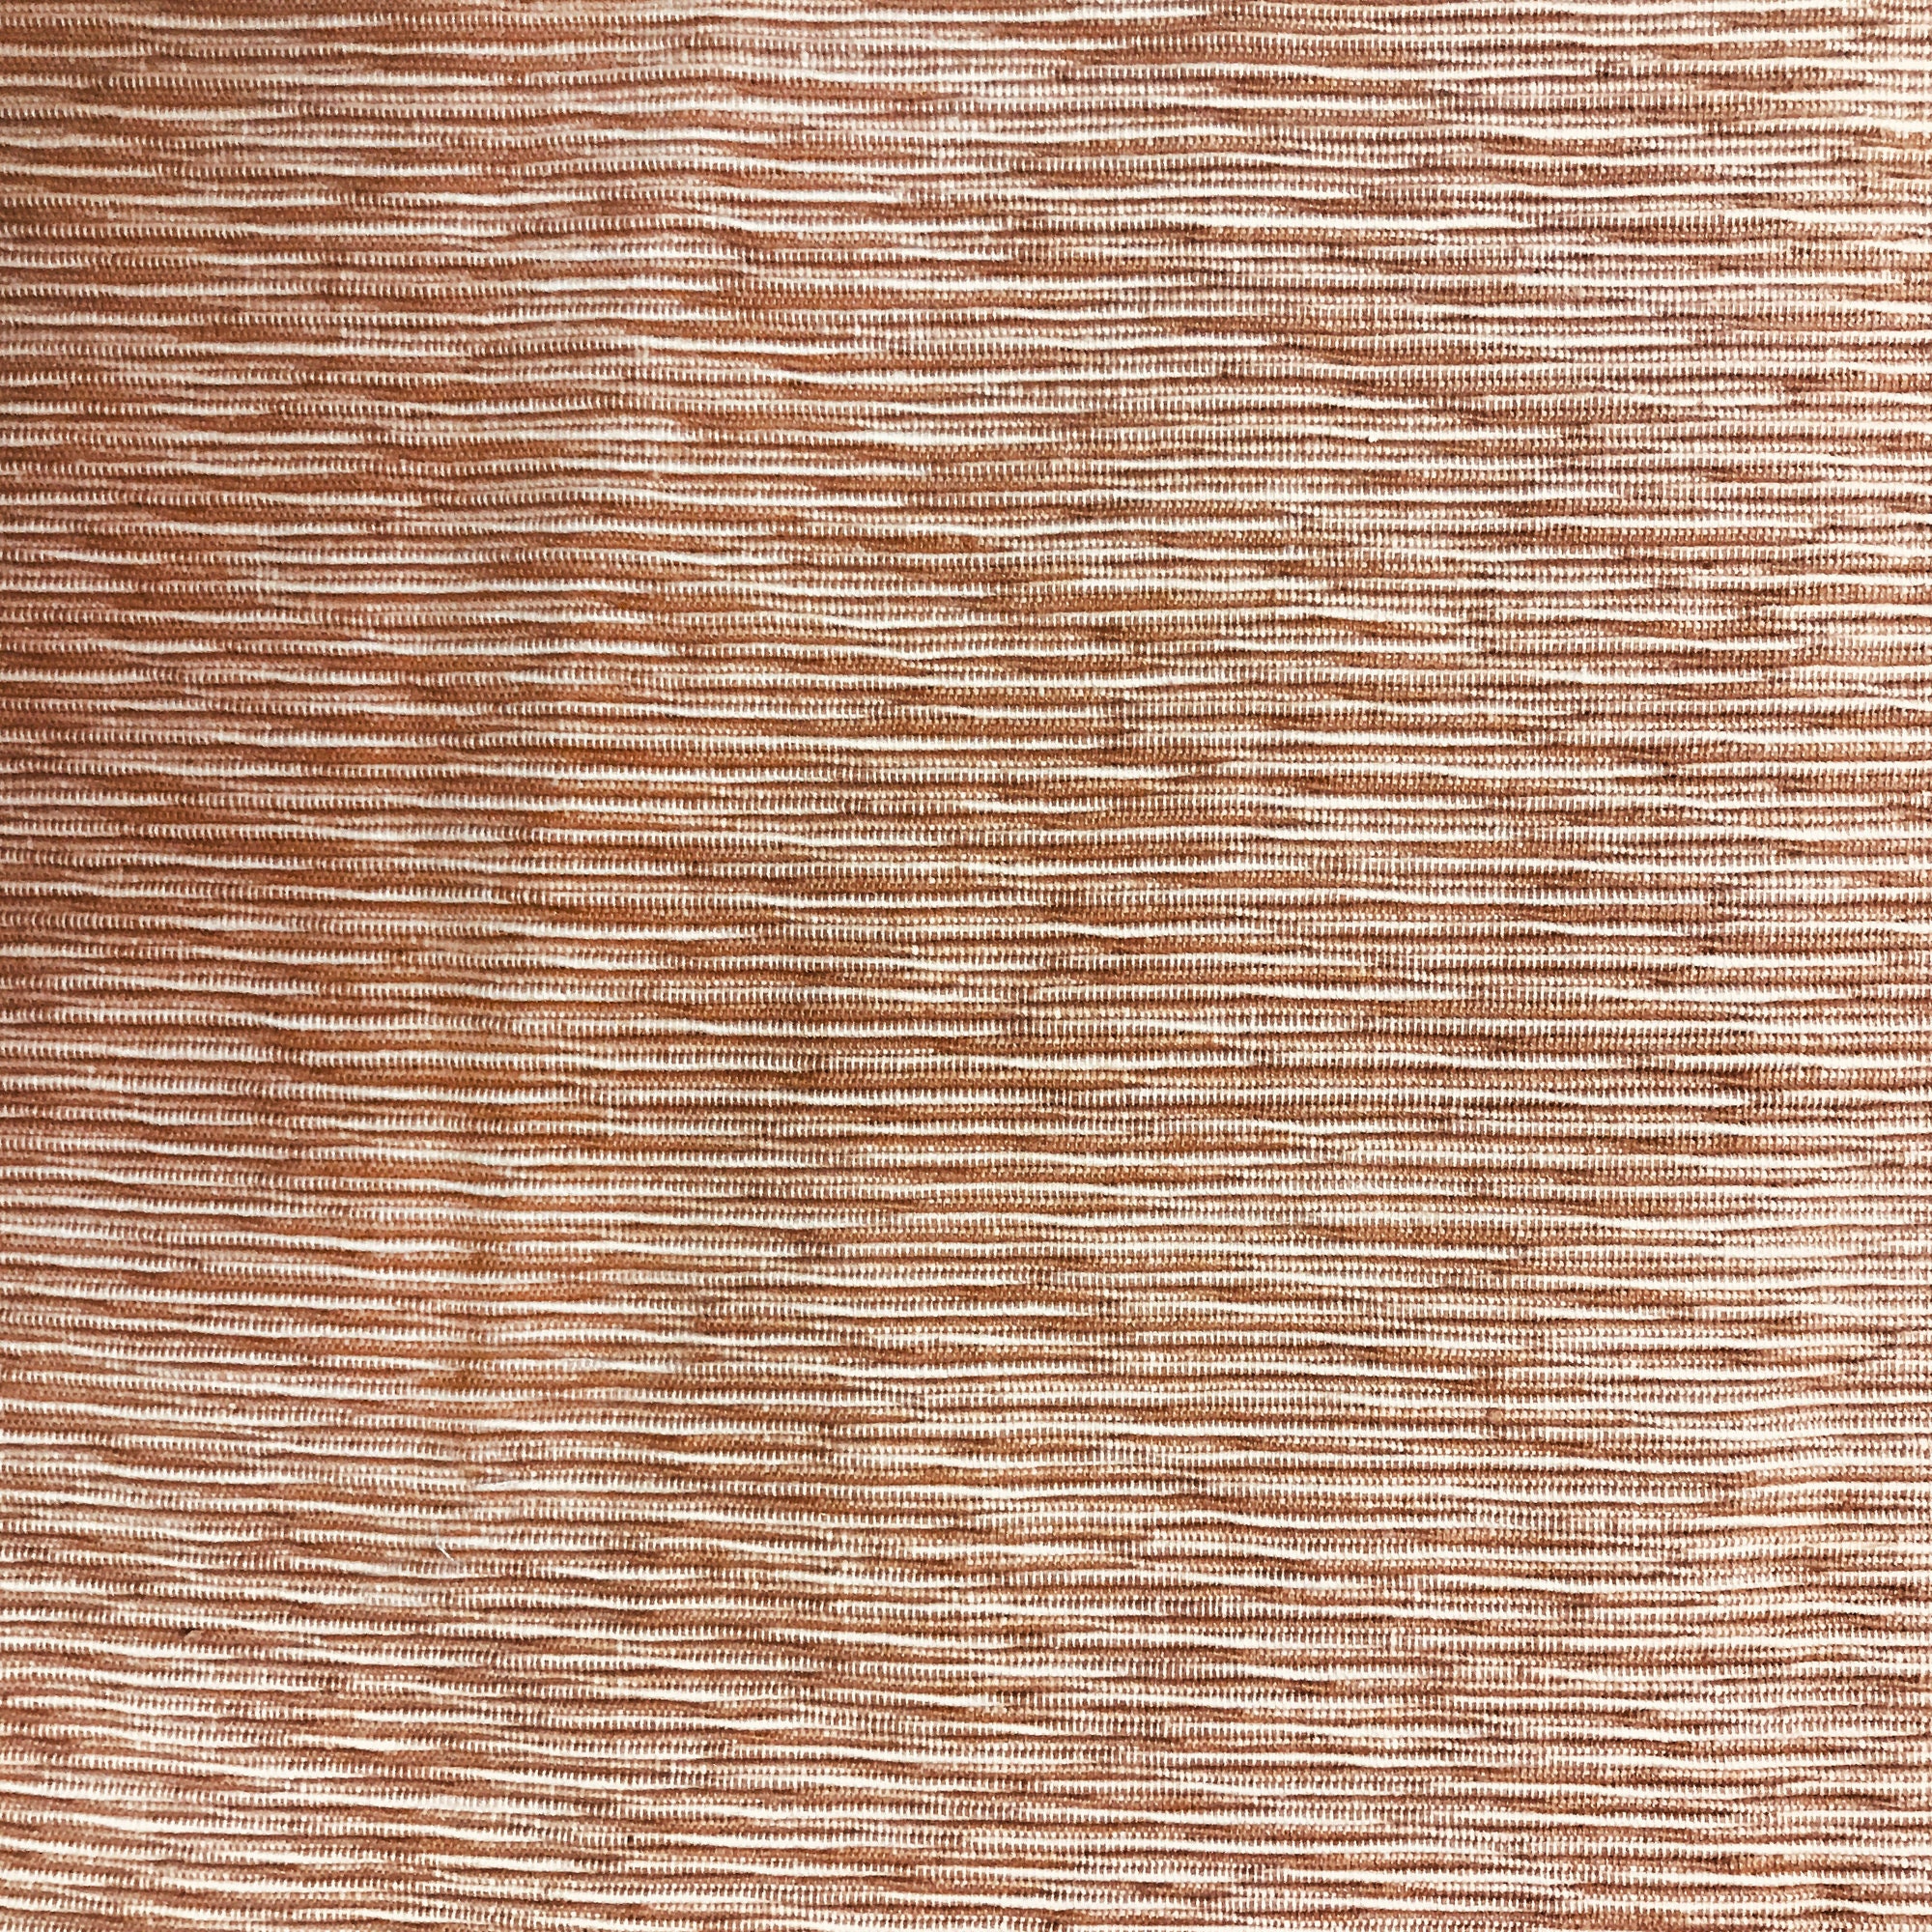 2.325 Yard Piece of Chenille Fabric | Slub Weave in Beige and Brown |  Heavyweight Upholstery | 54 Wide | By the Yard